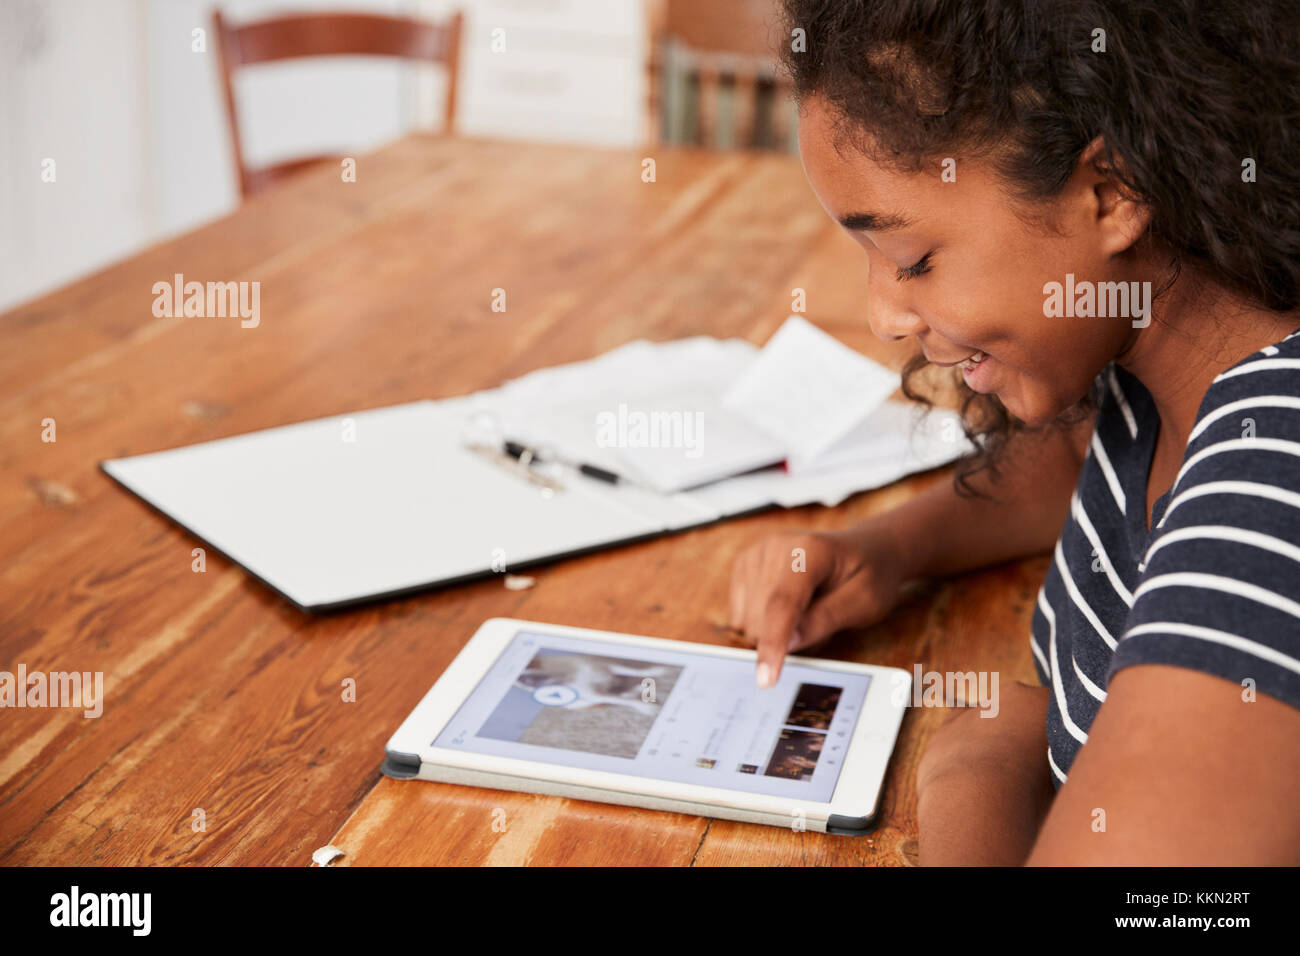 Teenage Girl With Digital Tablet Revising For Exam At Home Stock Photo